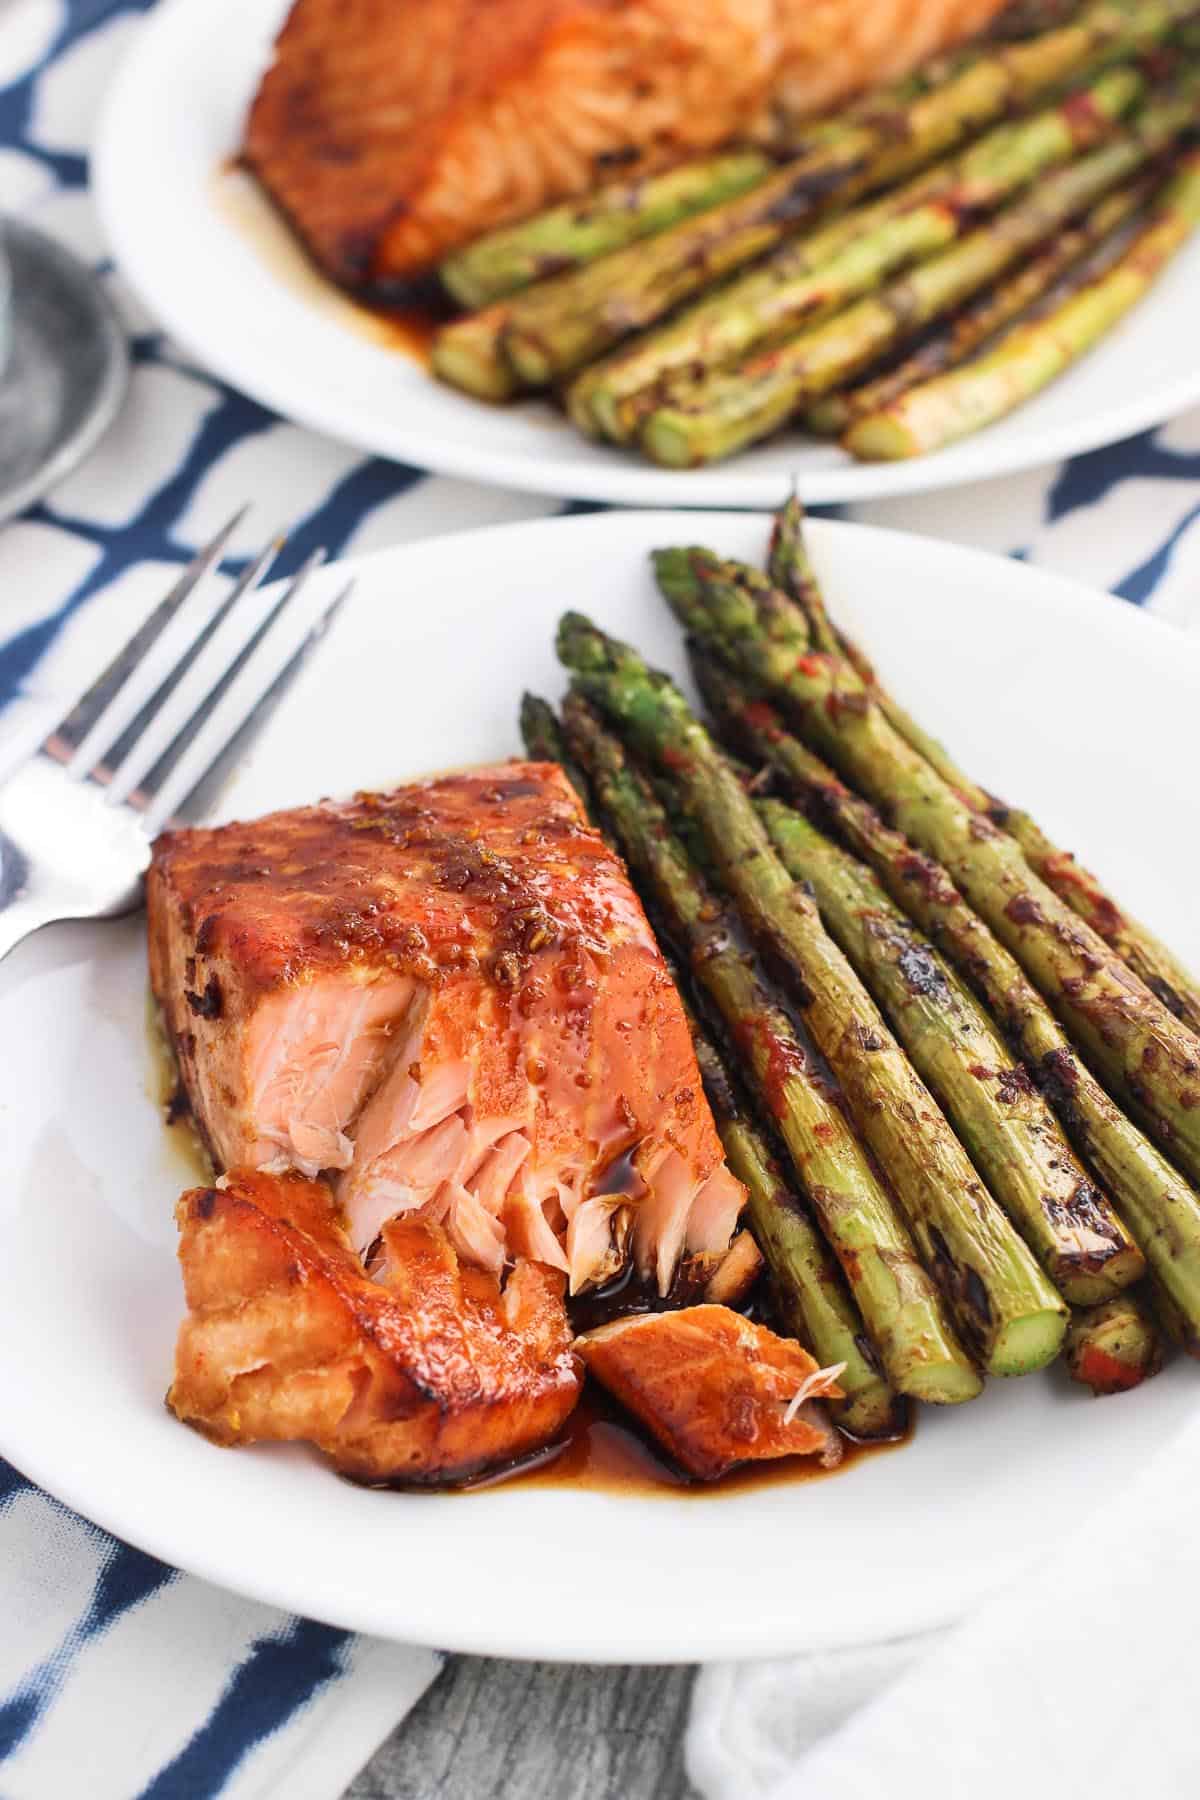 A cooked salmon fillet flaked on a plate with asparagus and sauce.